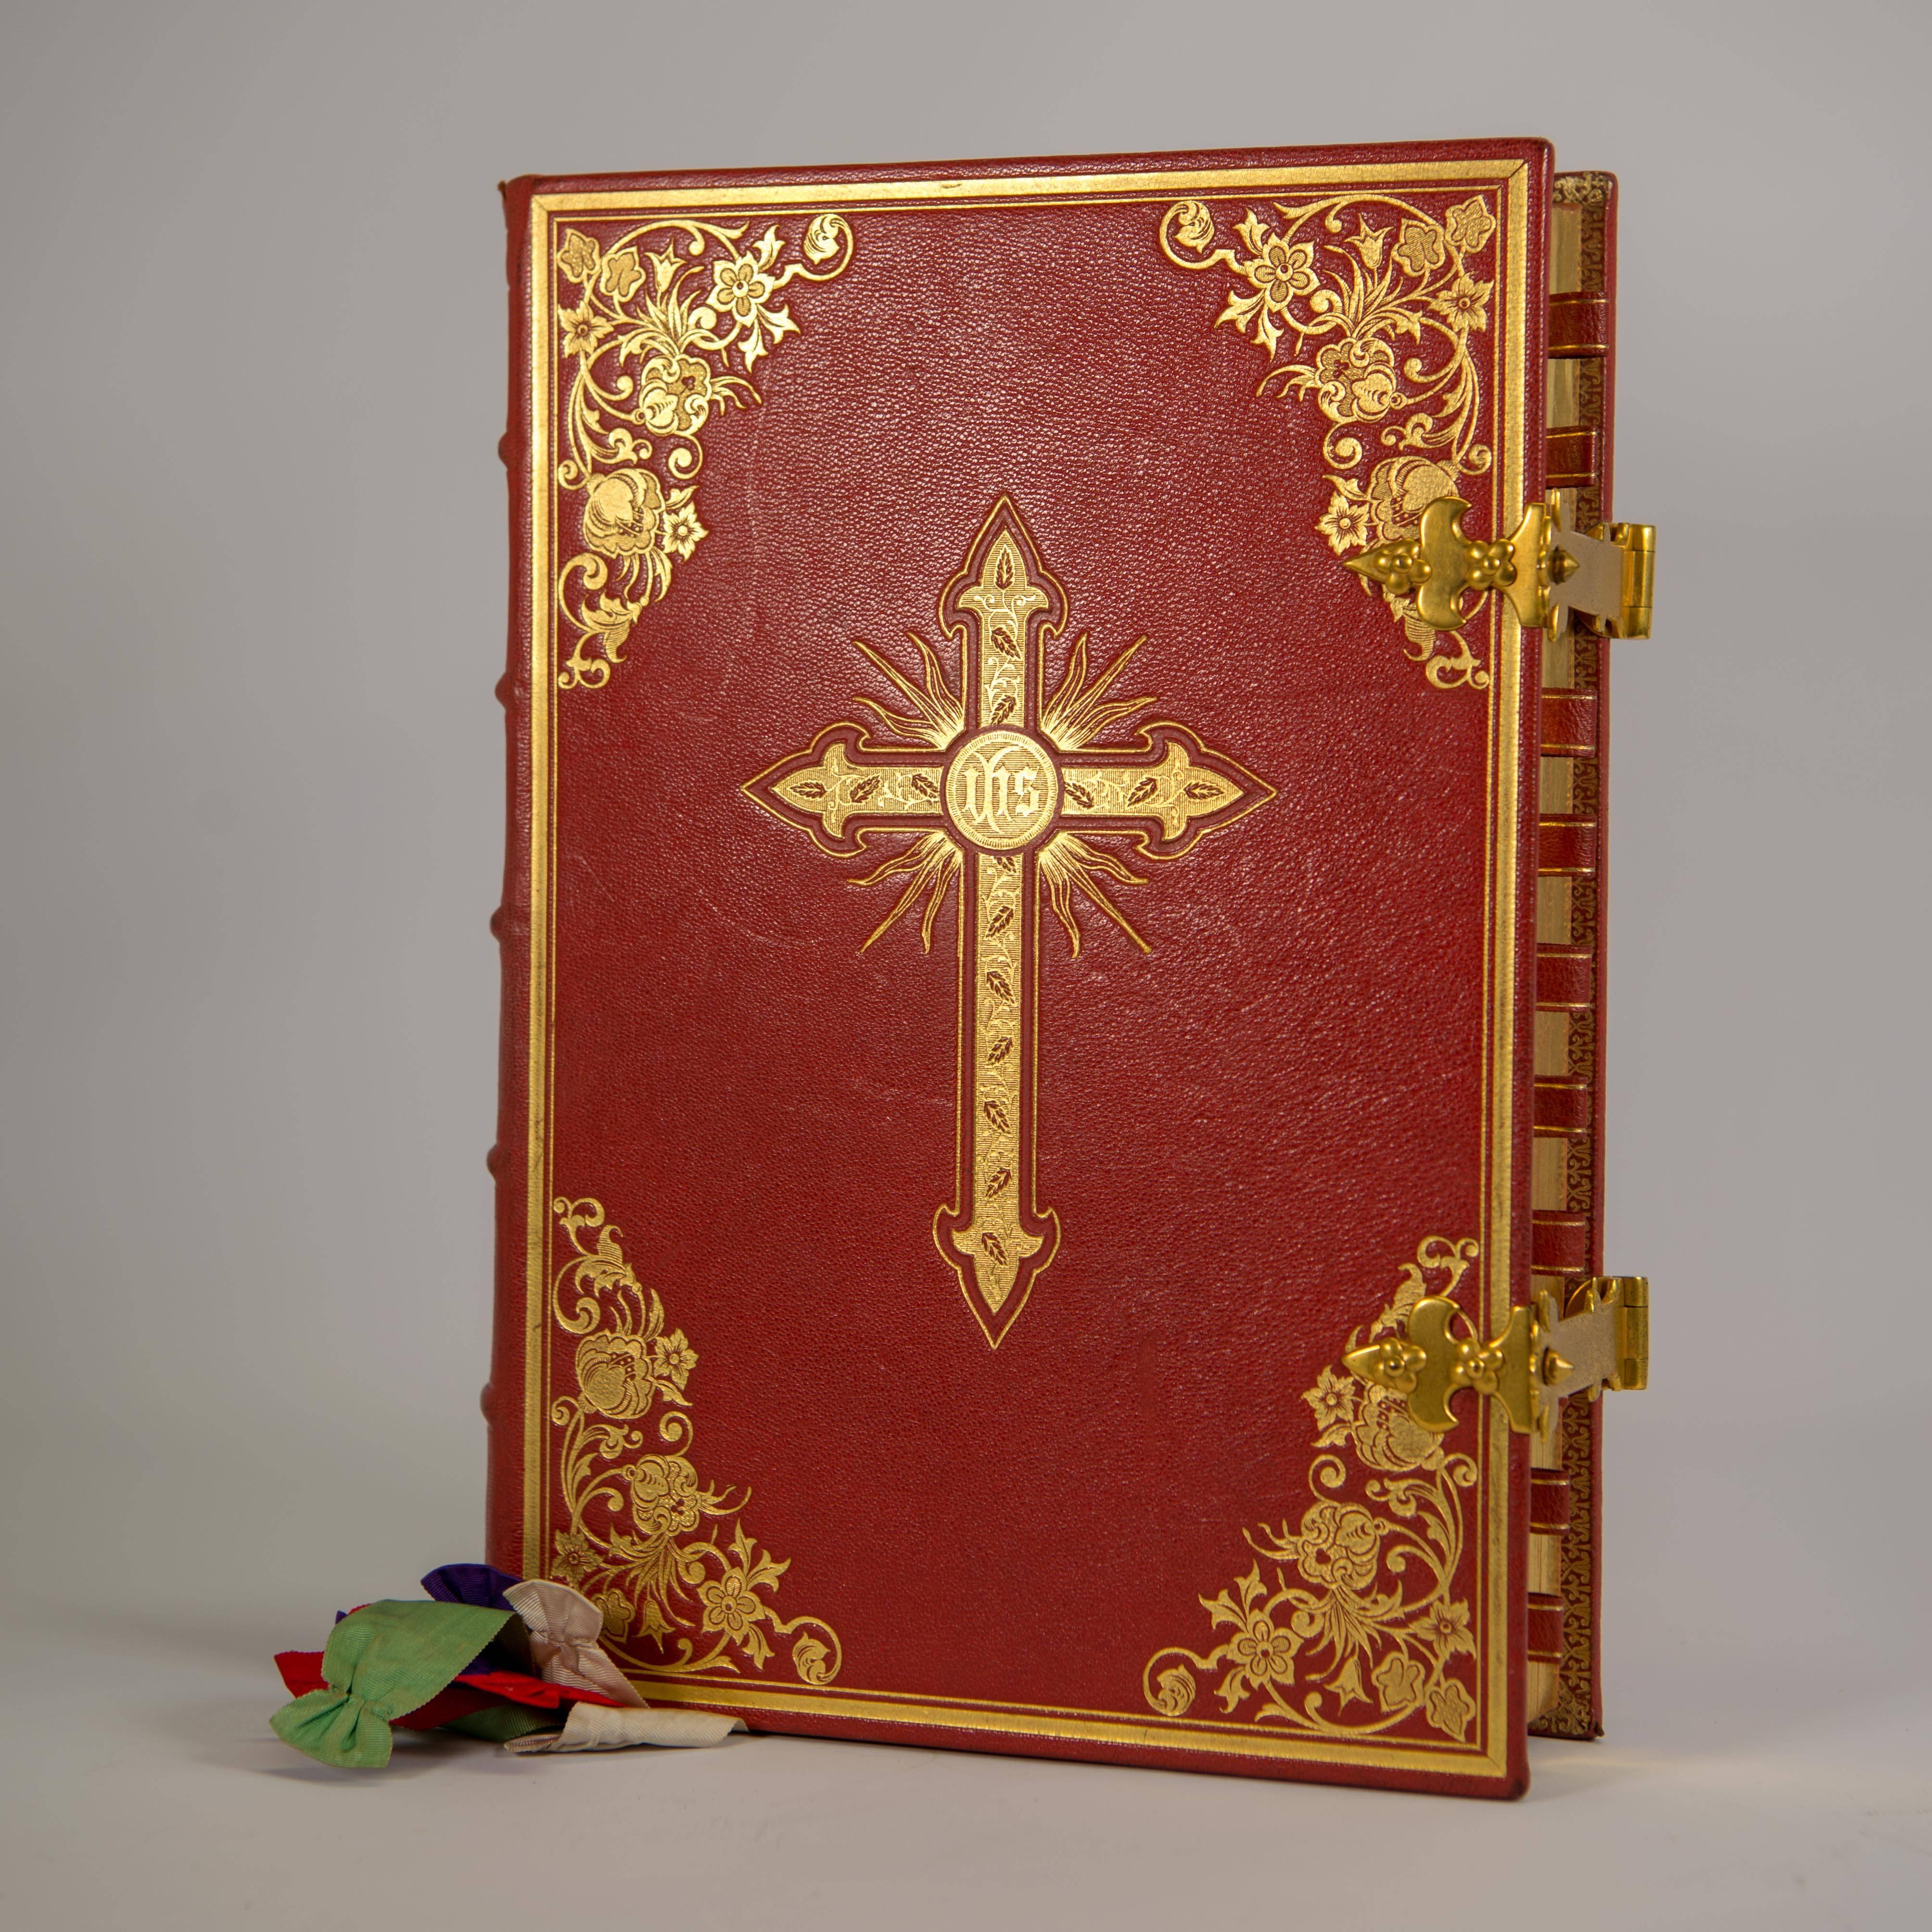 Latin liturgical book containing all instructions and texts necessary for the celebration of Mass throughout the year. The book has a gold-leaf cross and emblems on the front and back. Multiple songs and images printed on the inside. 

Book is in